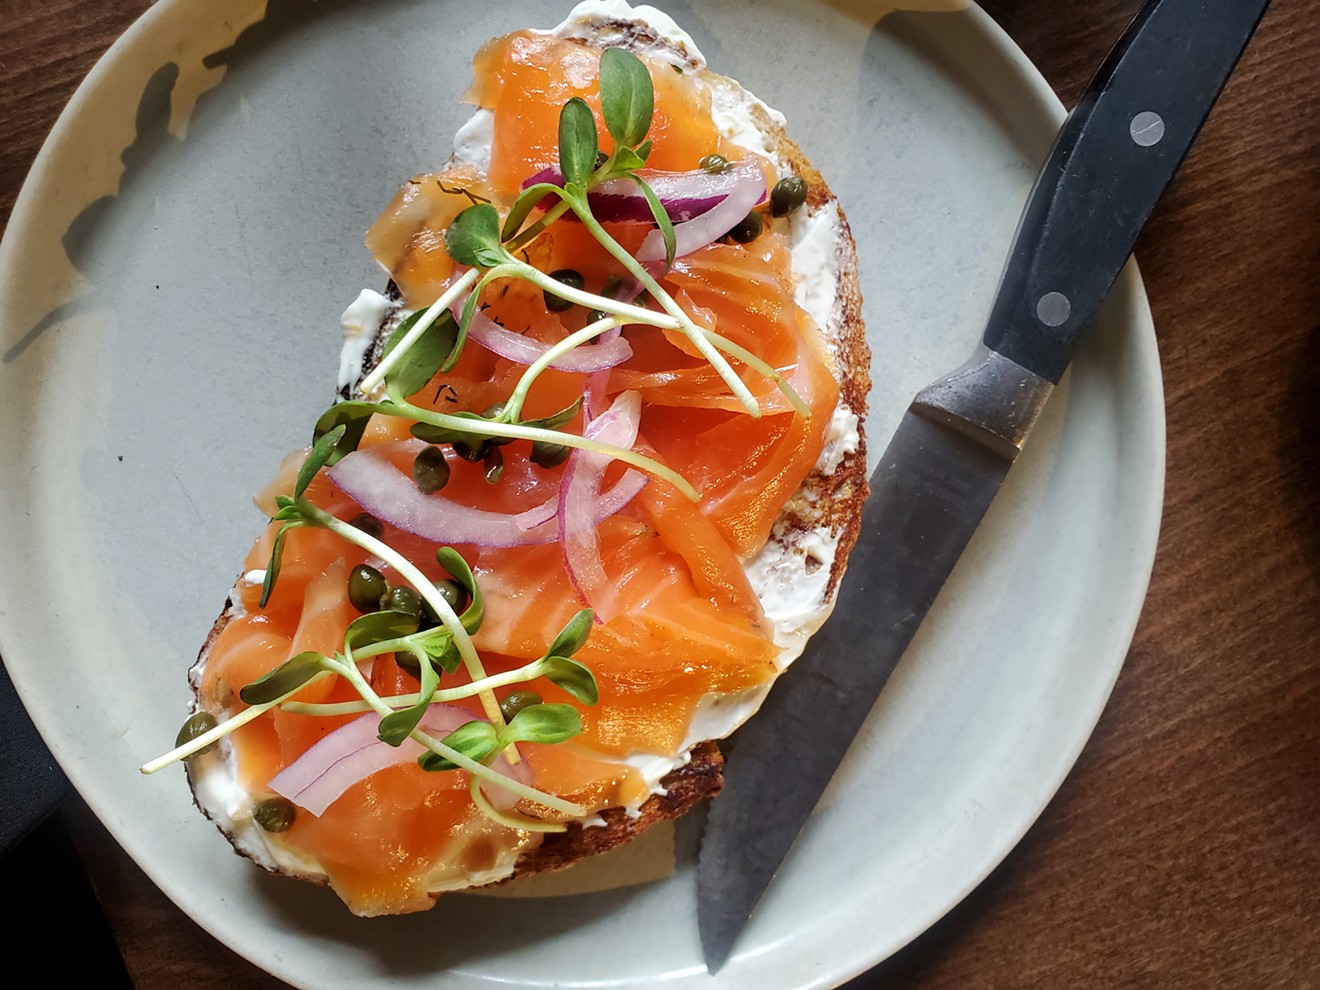 The lox tartine at Nest is made on sourdough from Reunion Bread Co.